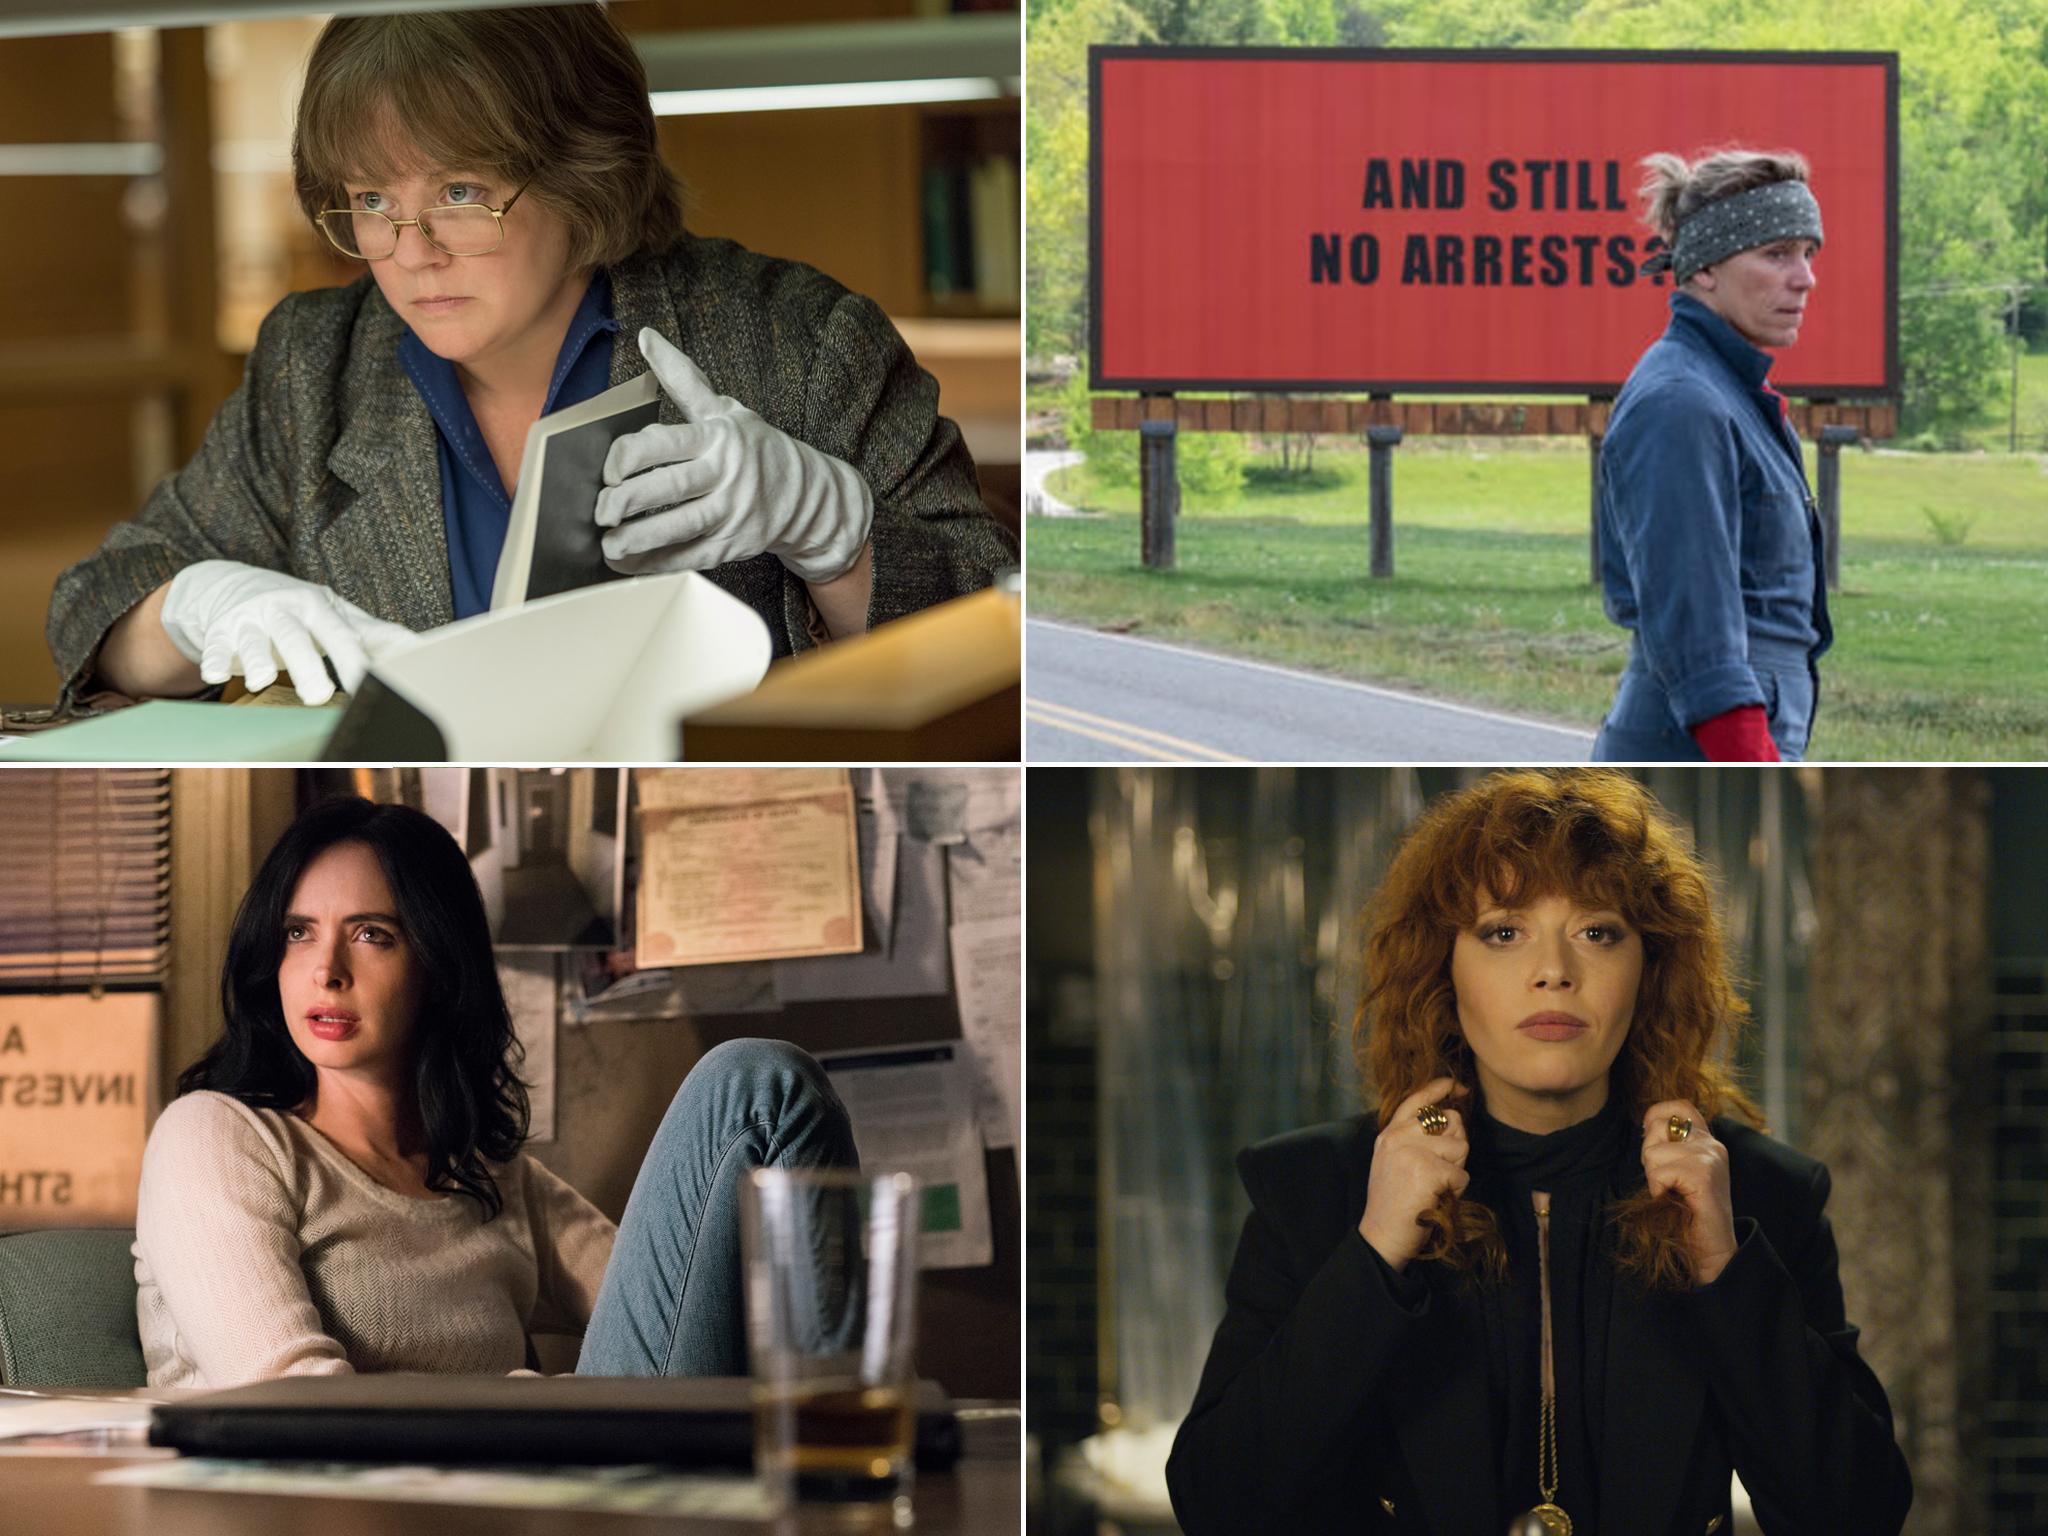 Present imperfect: pictured (clockwise, from top left), Melissa McCarthy in ‘Can You Ever Forgive Me?’, Frances McDormand in ‘Three Billboards’, Natasha Lyonne in ‘Russian Doll’, and Krysten Ritter in ‘Jessica Jones’